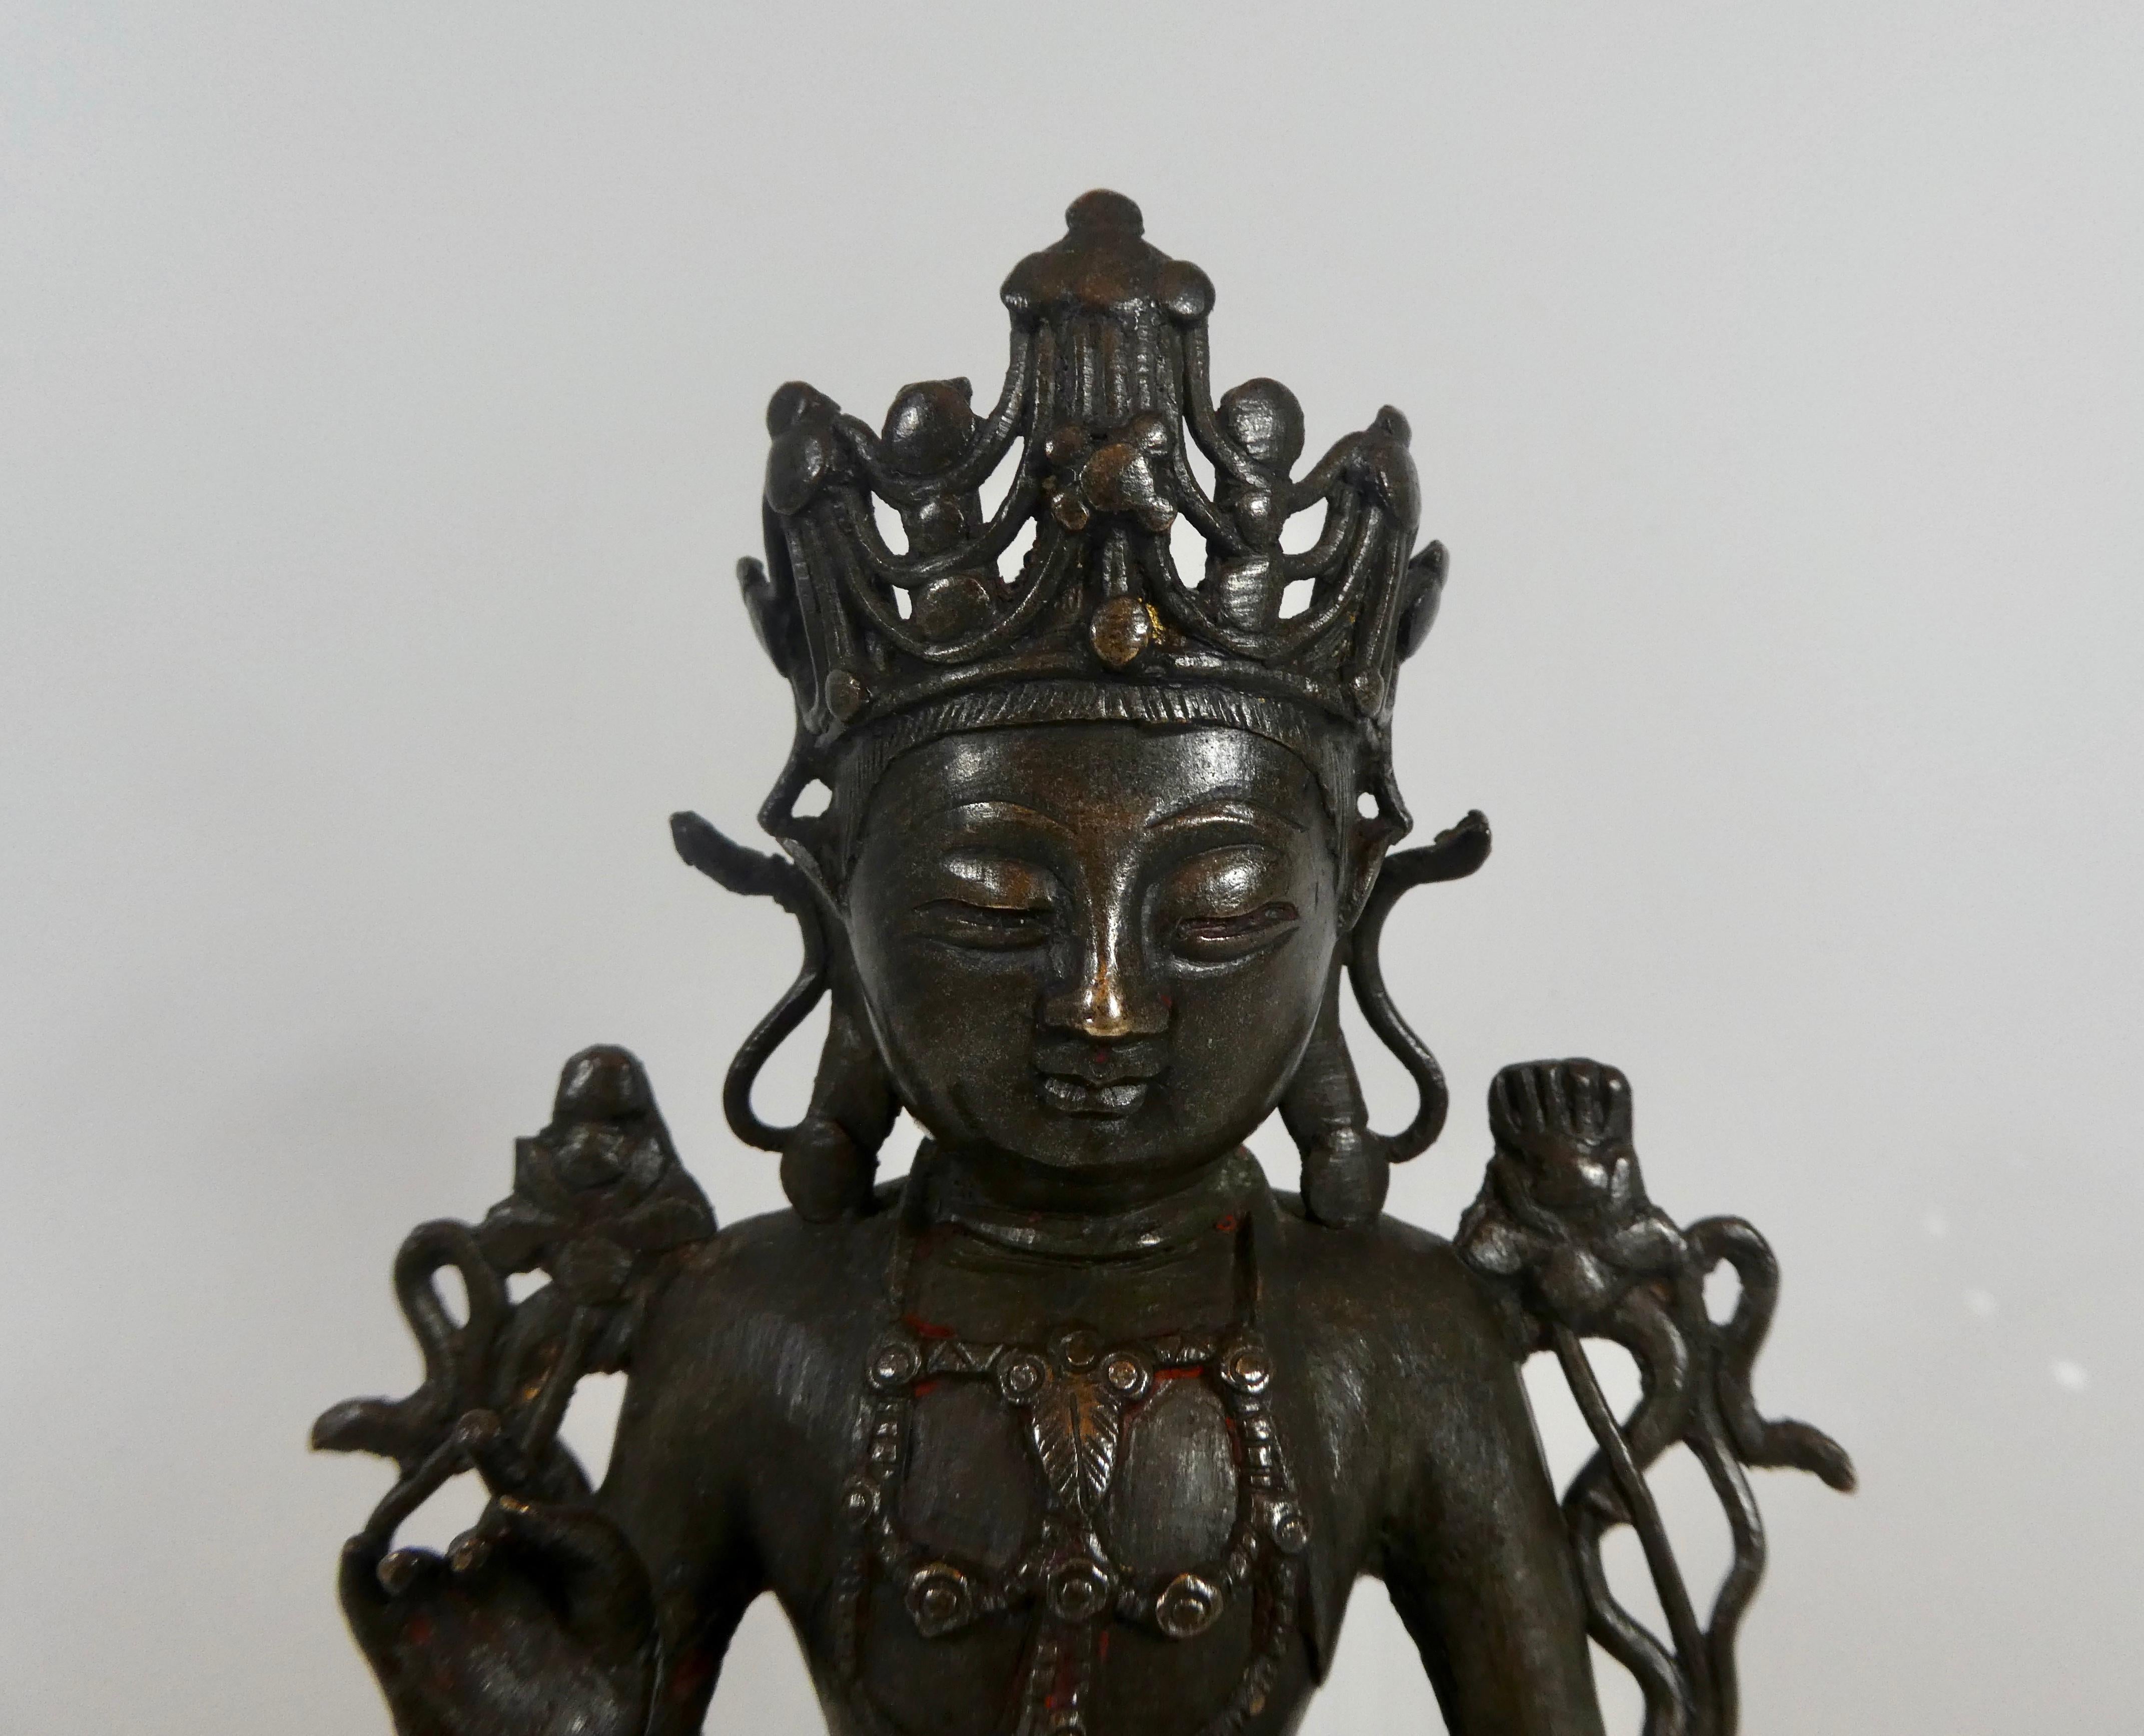 Chinese bronze figure of Guanyin, circa 1600, Ming dynasty. The goddess’ face is cast with a contemplative expression, beneath a five part crown, and she is seated in padmasana with hands in vitarkamudra. Wearing a beaded necklace and girdle, she